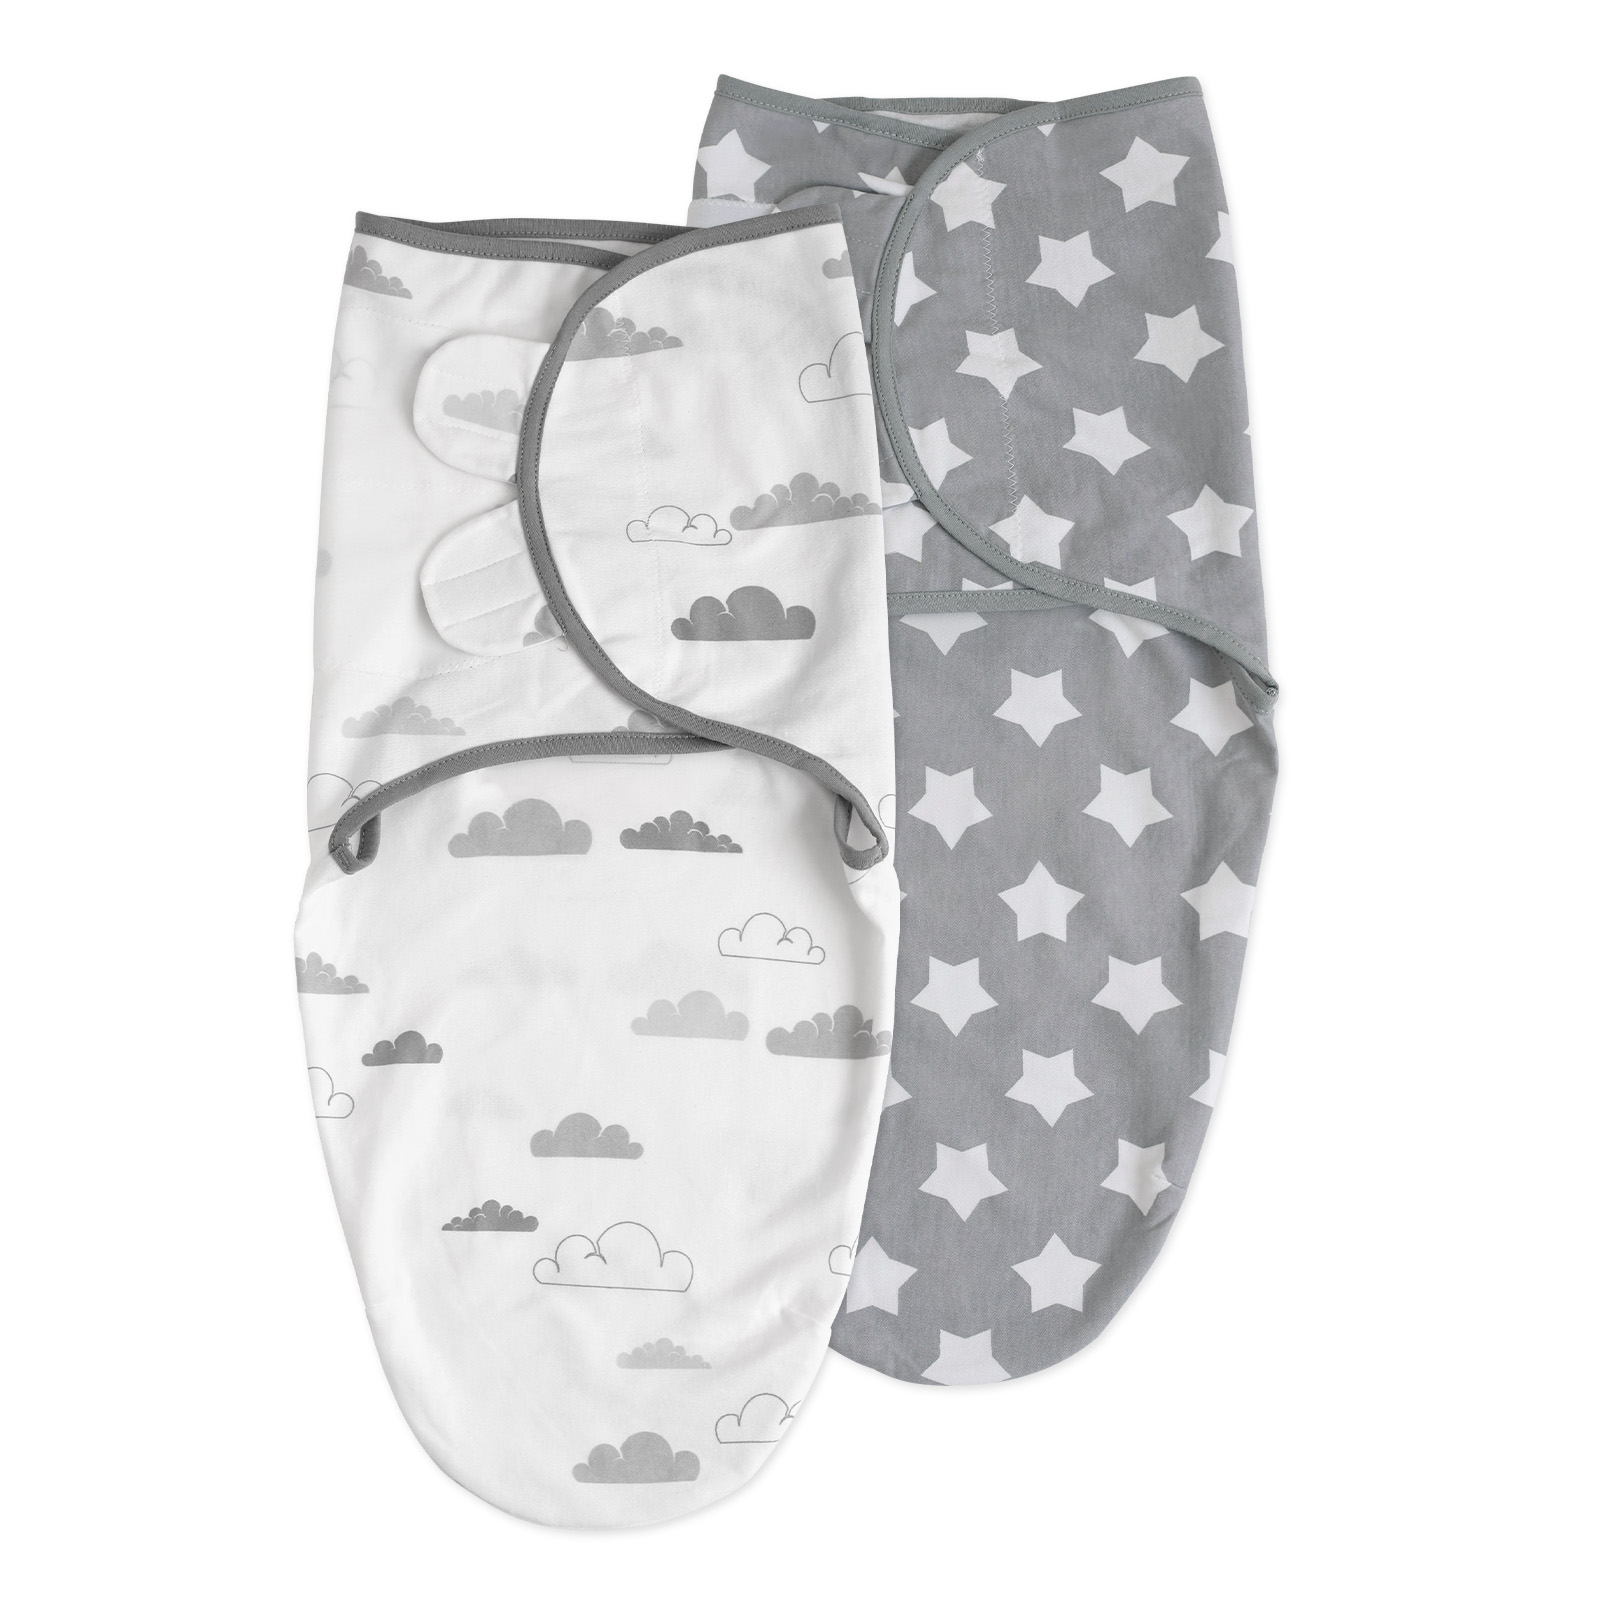 Clouds and Stars | Soarwg Baby Swaddle 0-3 Months 2-Pack